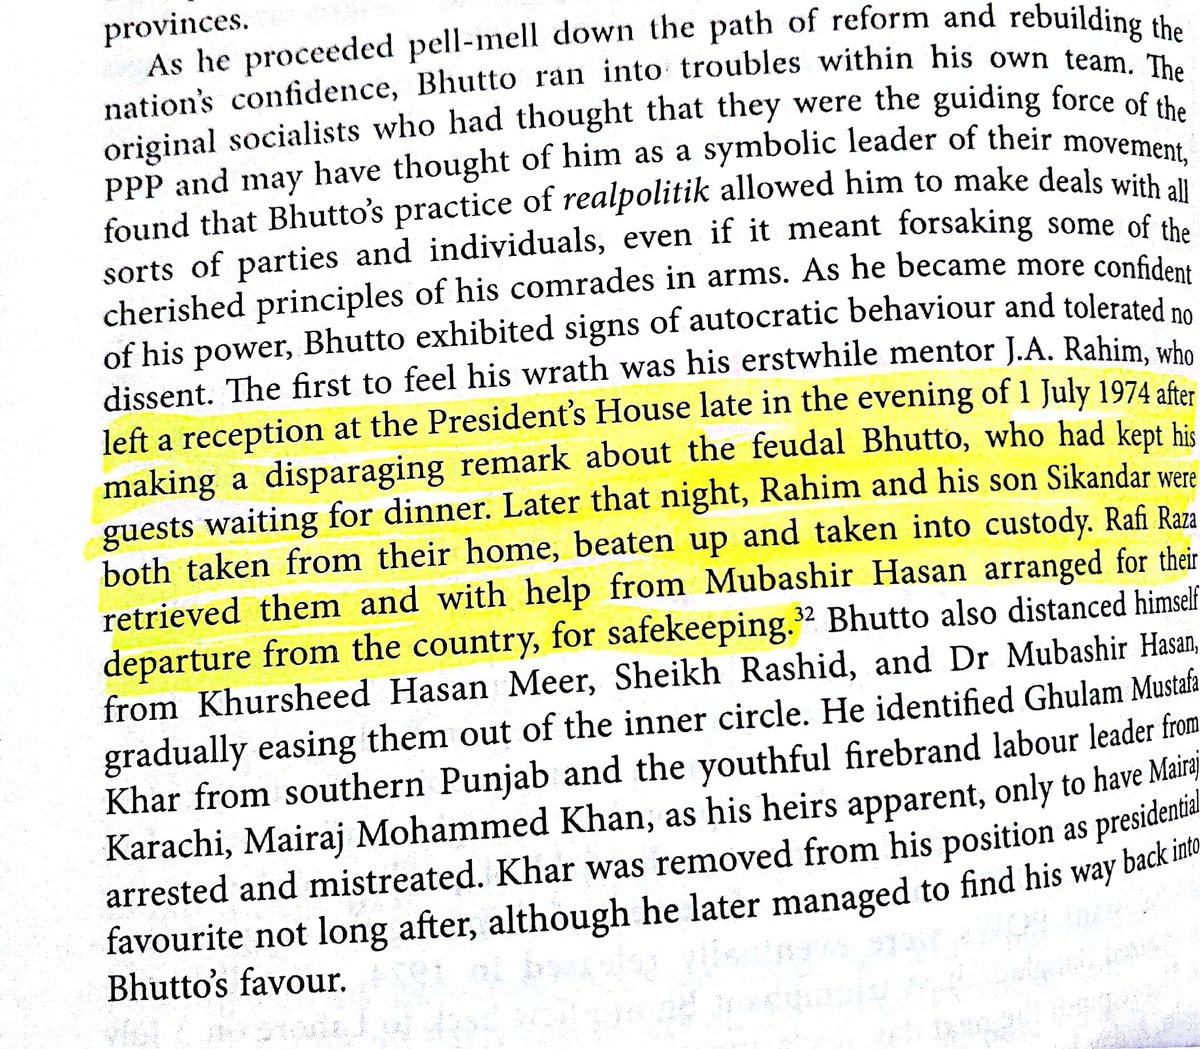 Bhutto used FSF (Pak Gestapo) against his own party members & opposition leaders.Got his mentor (J.A. Rahim) brutally beaten because Rahim made disparaging remarks.Opened cases against Ch Zahoor such as Bhains Choori & Weapons smuggling on camel-back.